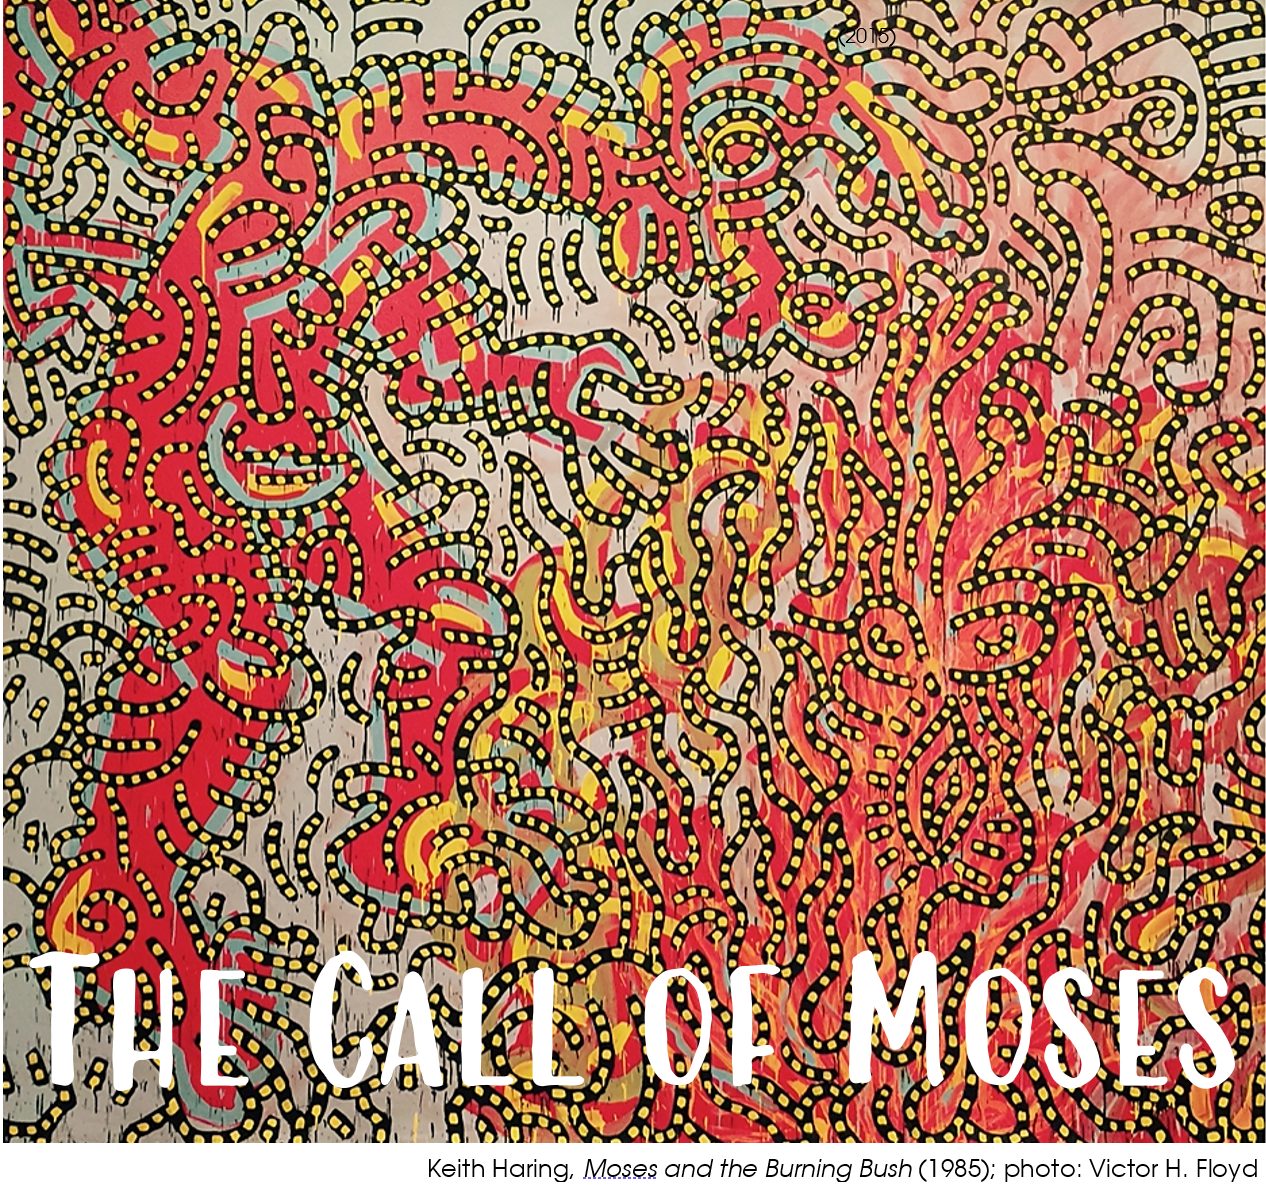 Keith Haring's 'Moses' - An abstract mosaic type of painting